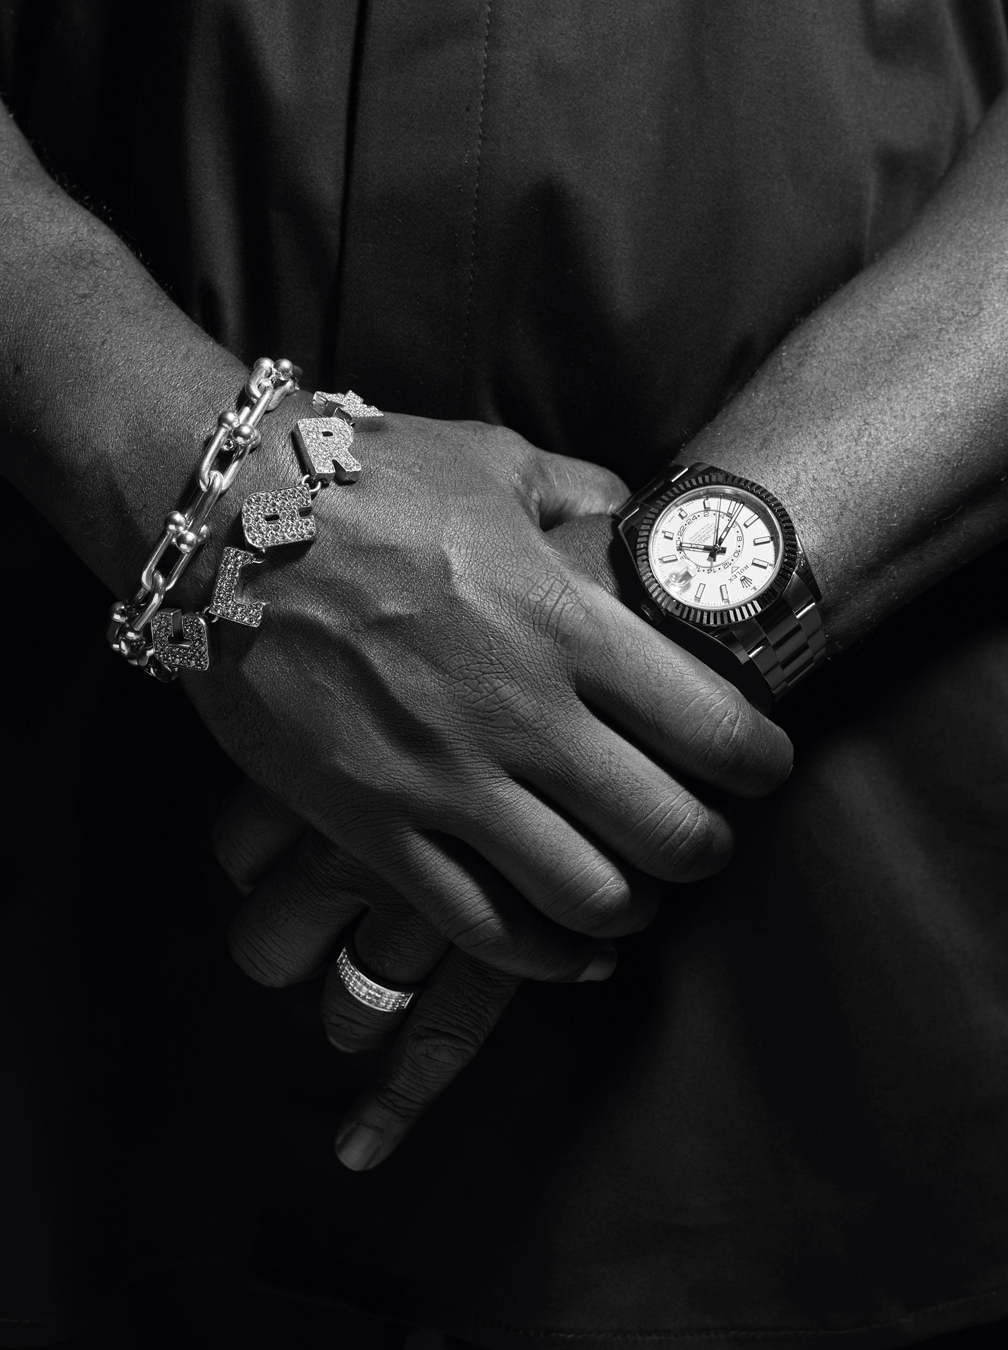 DJ Clark Kent's hands clasped. One with a watch and ring, the other with a chain and diamond CLARK bracelets.